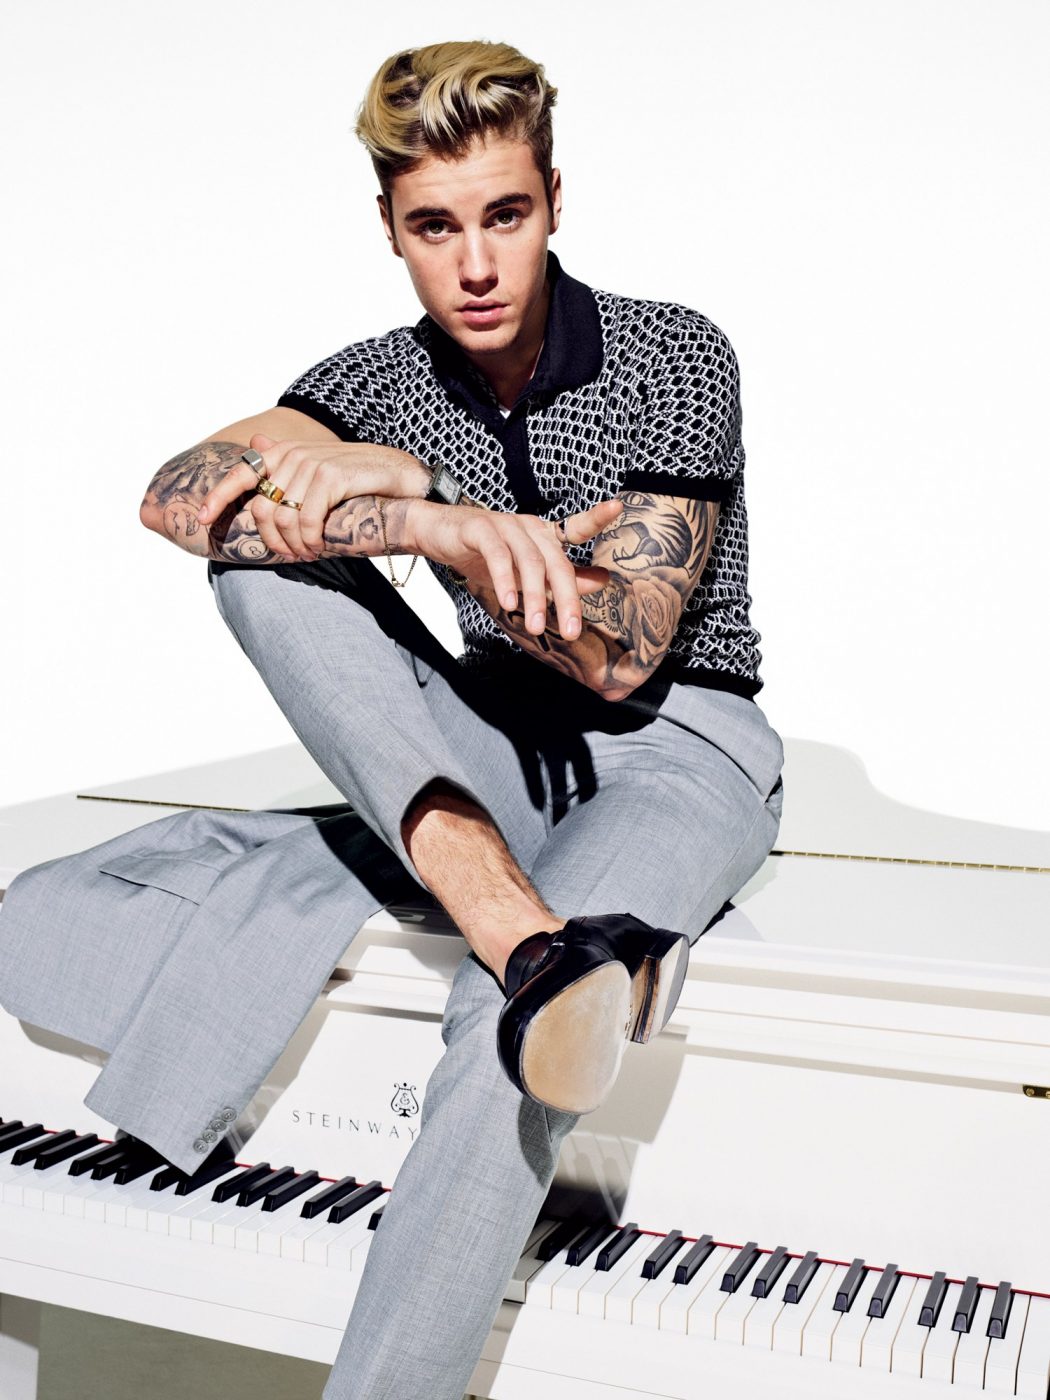 justin bieber gq 0316 02 15 Male Celebrities Fashion Trends for Summer - 25